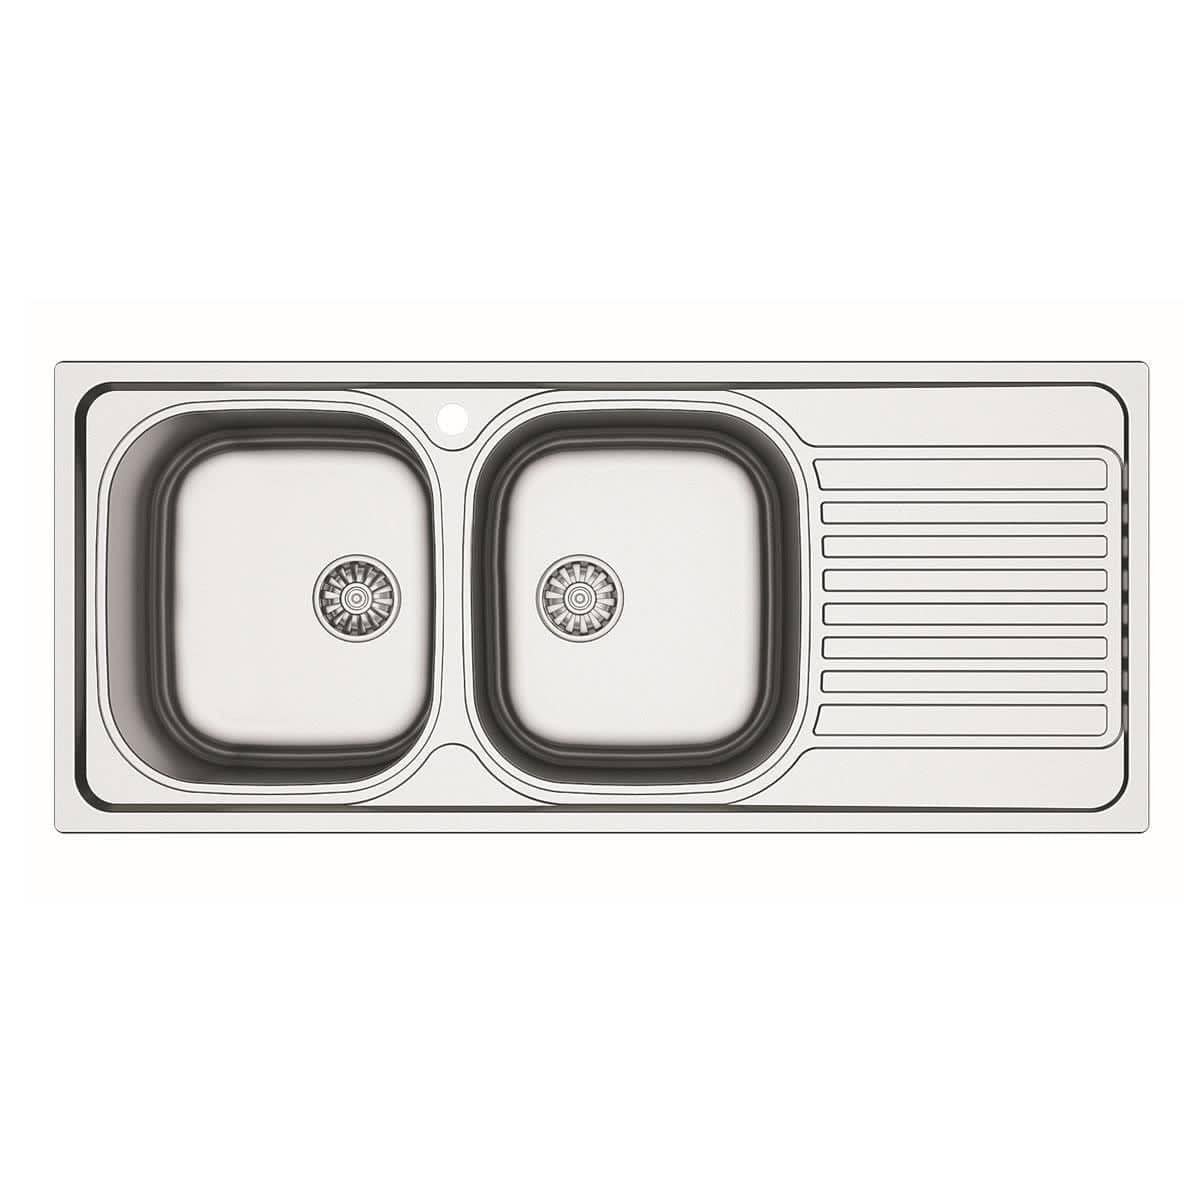 Asil Krom Stainless Steel Double Bowl 116 x 50cm Kitchen Sink | Supply Master | Accra, Ghana Kitchen Sink Buy Tools hardware Building materials